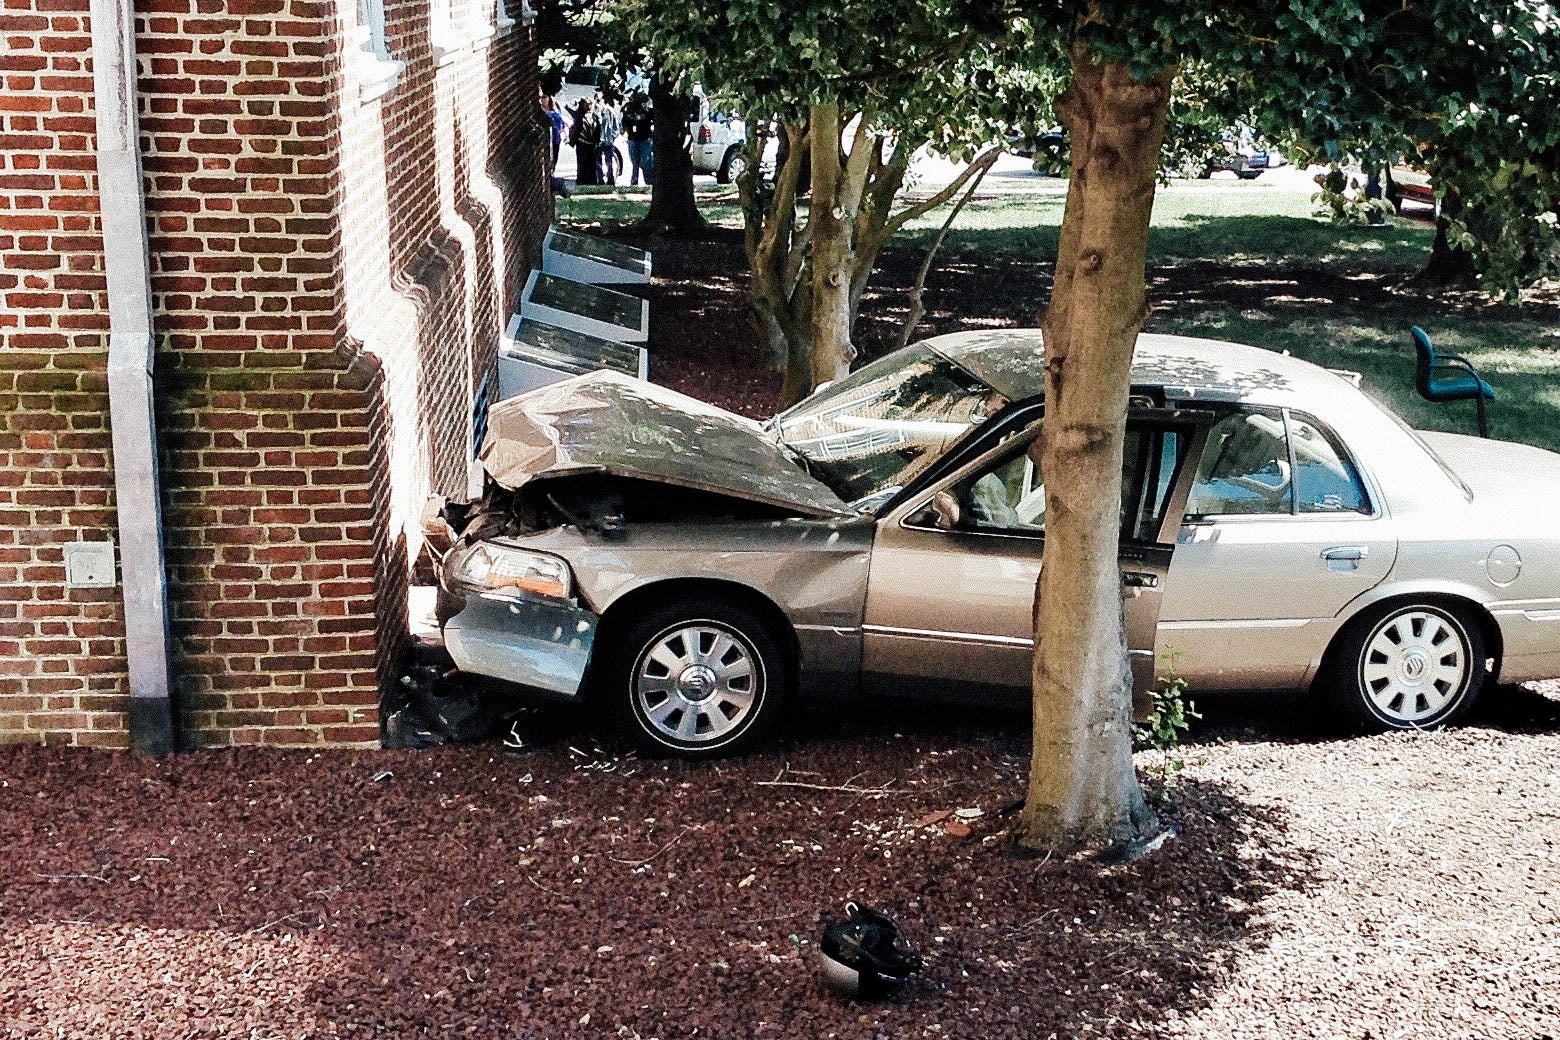 A car crashed into a brick wall, with its front crunched up from the collision. 